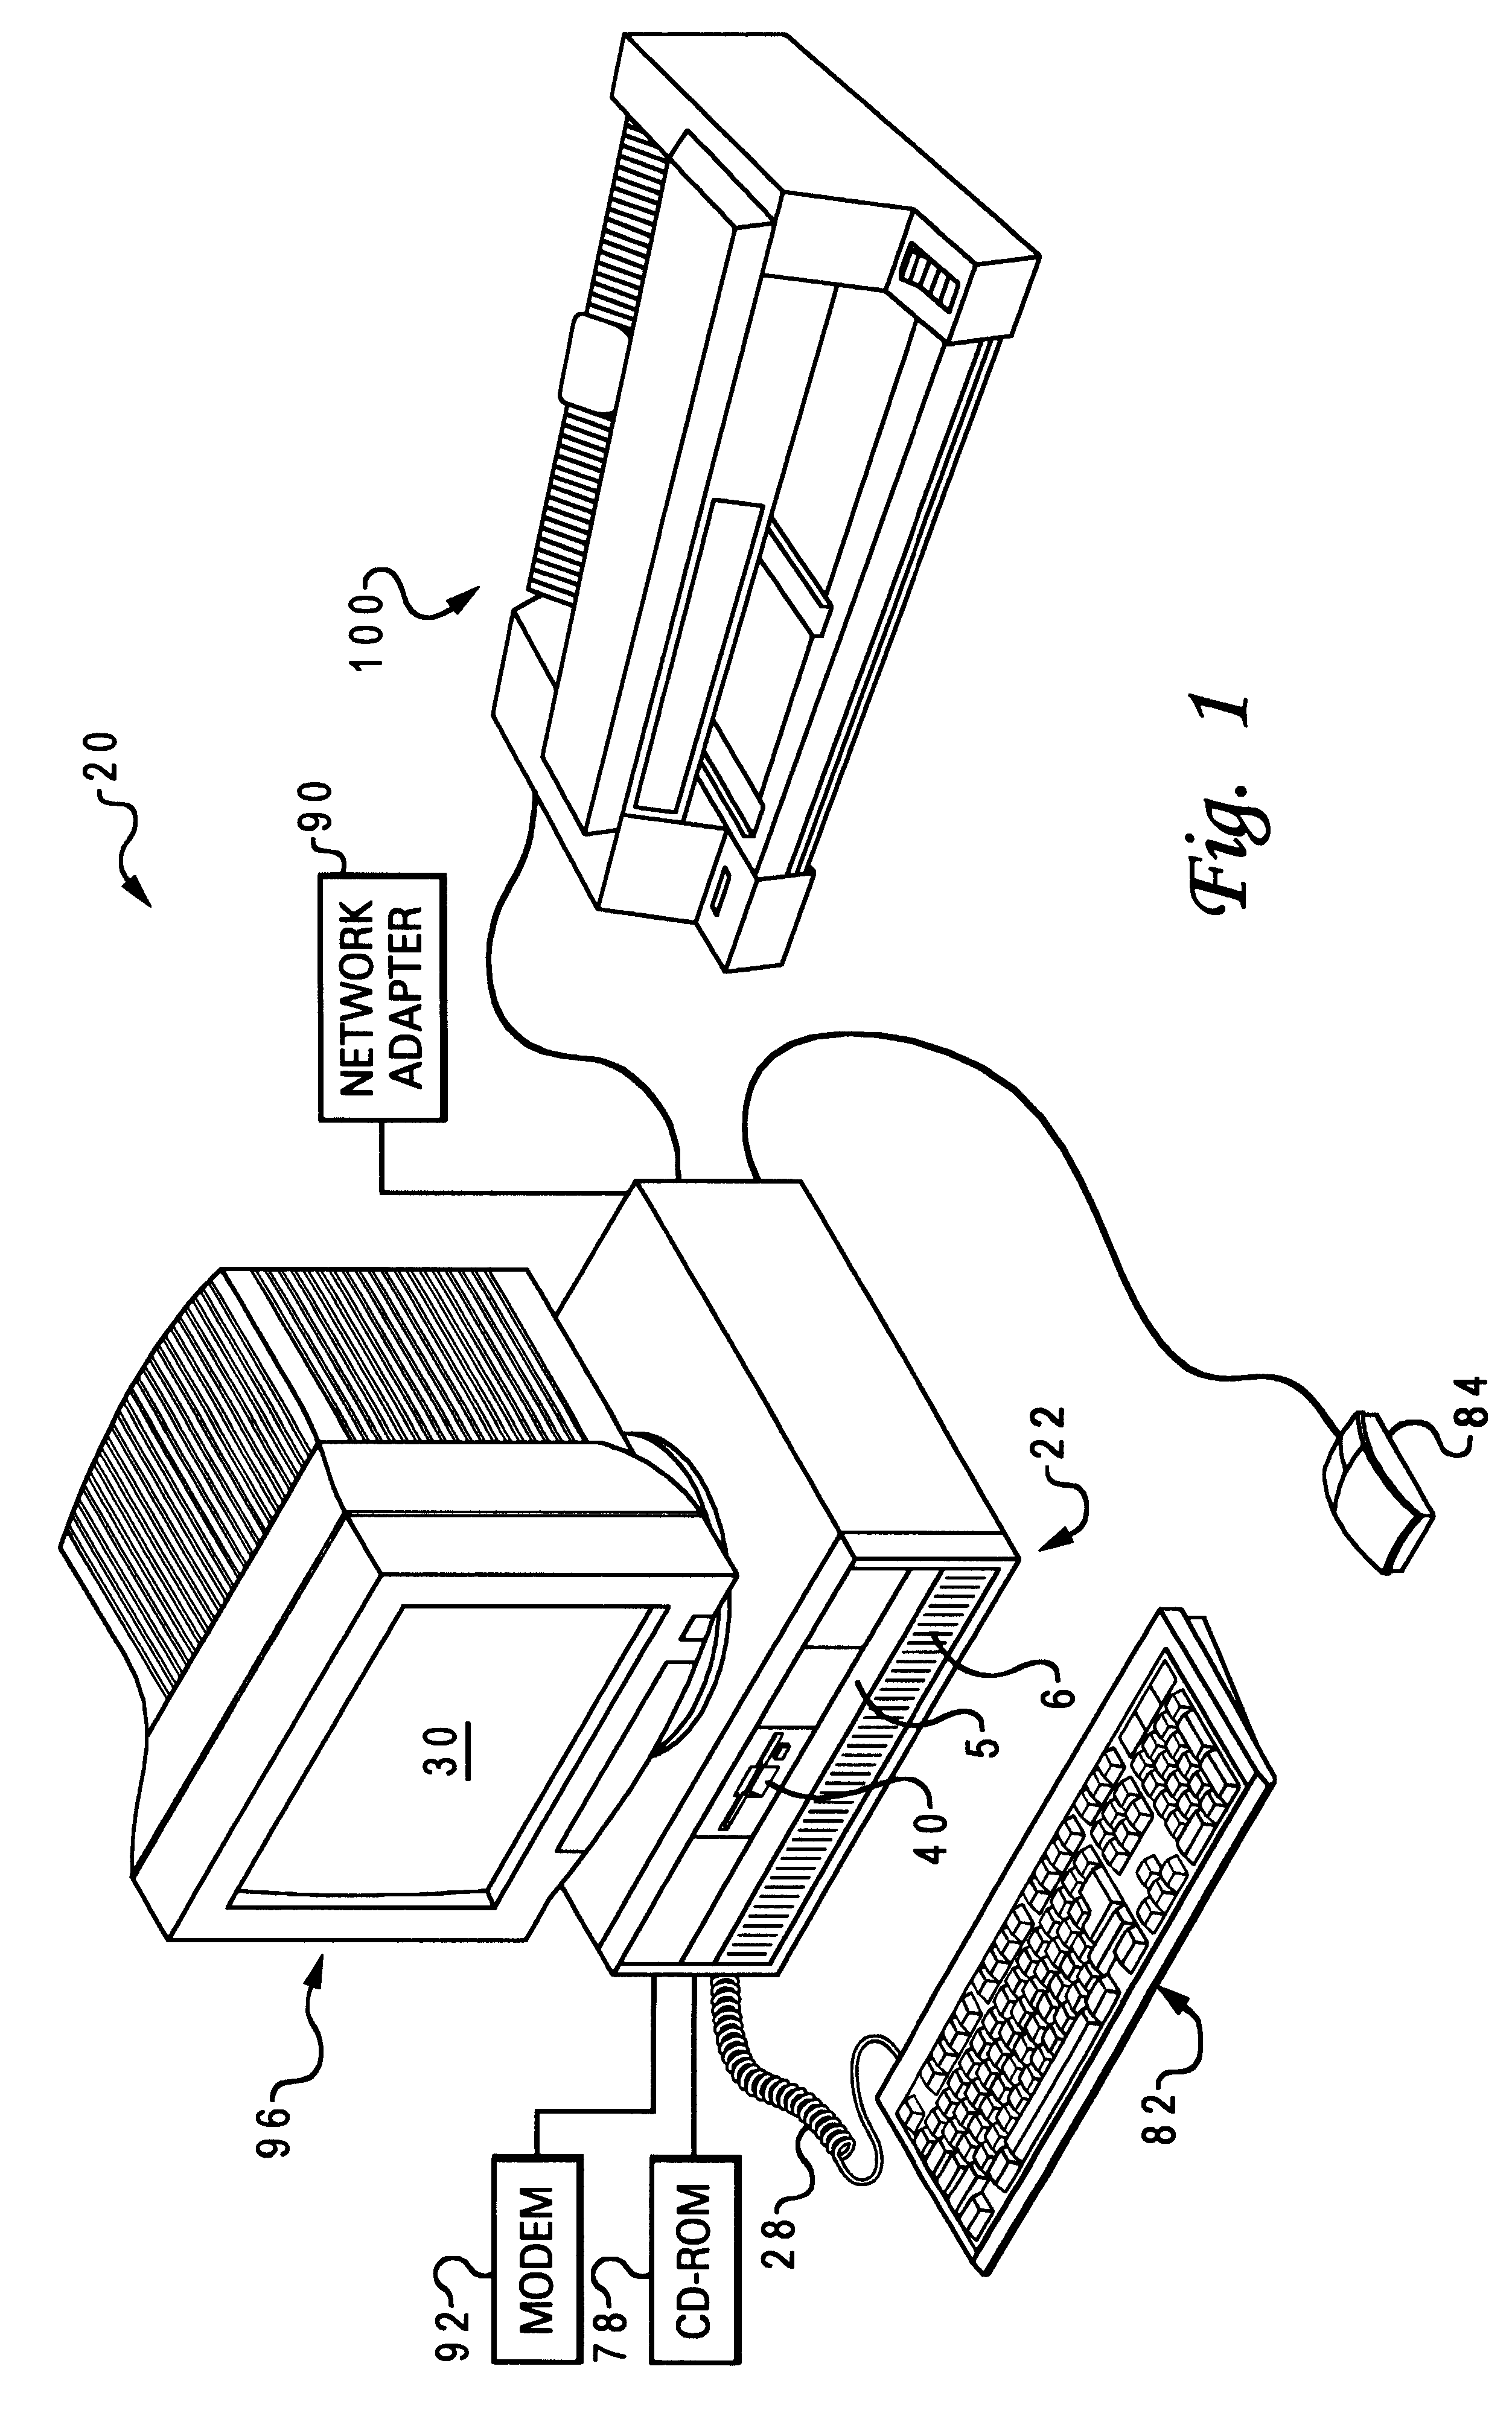 Method and system for PCI slot expansion via electrical isolation